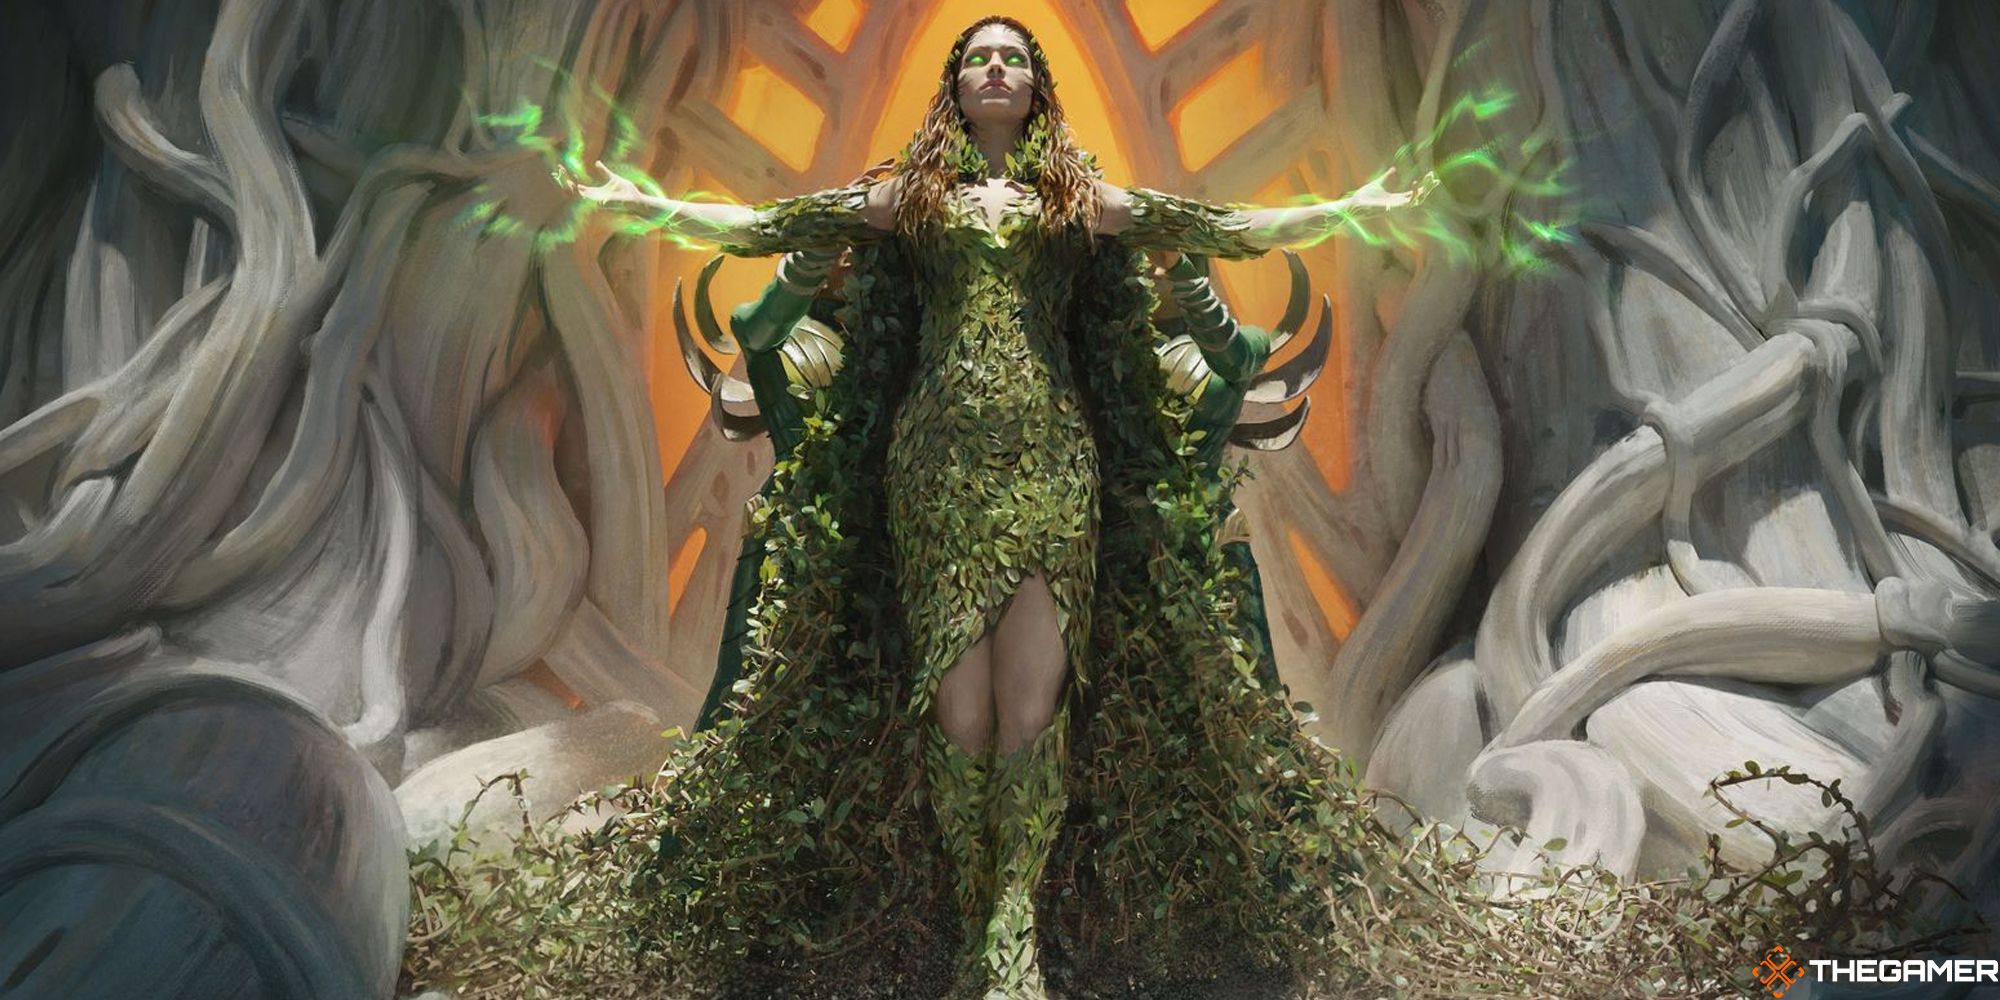 Artwork of Titania, Voice of Gaea by Cristi Balanescu from MTG, showing a woman wearing a dress and cloak made of leaves, arms stretched, seemingly casting a spell.